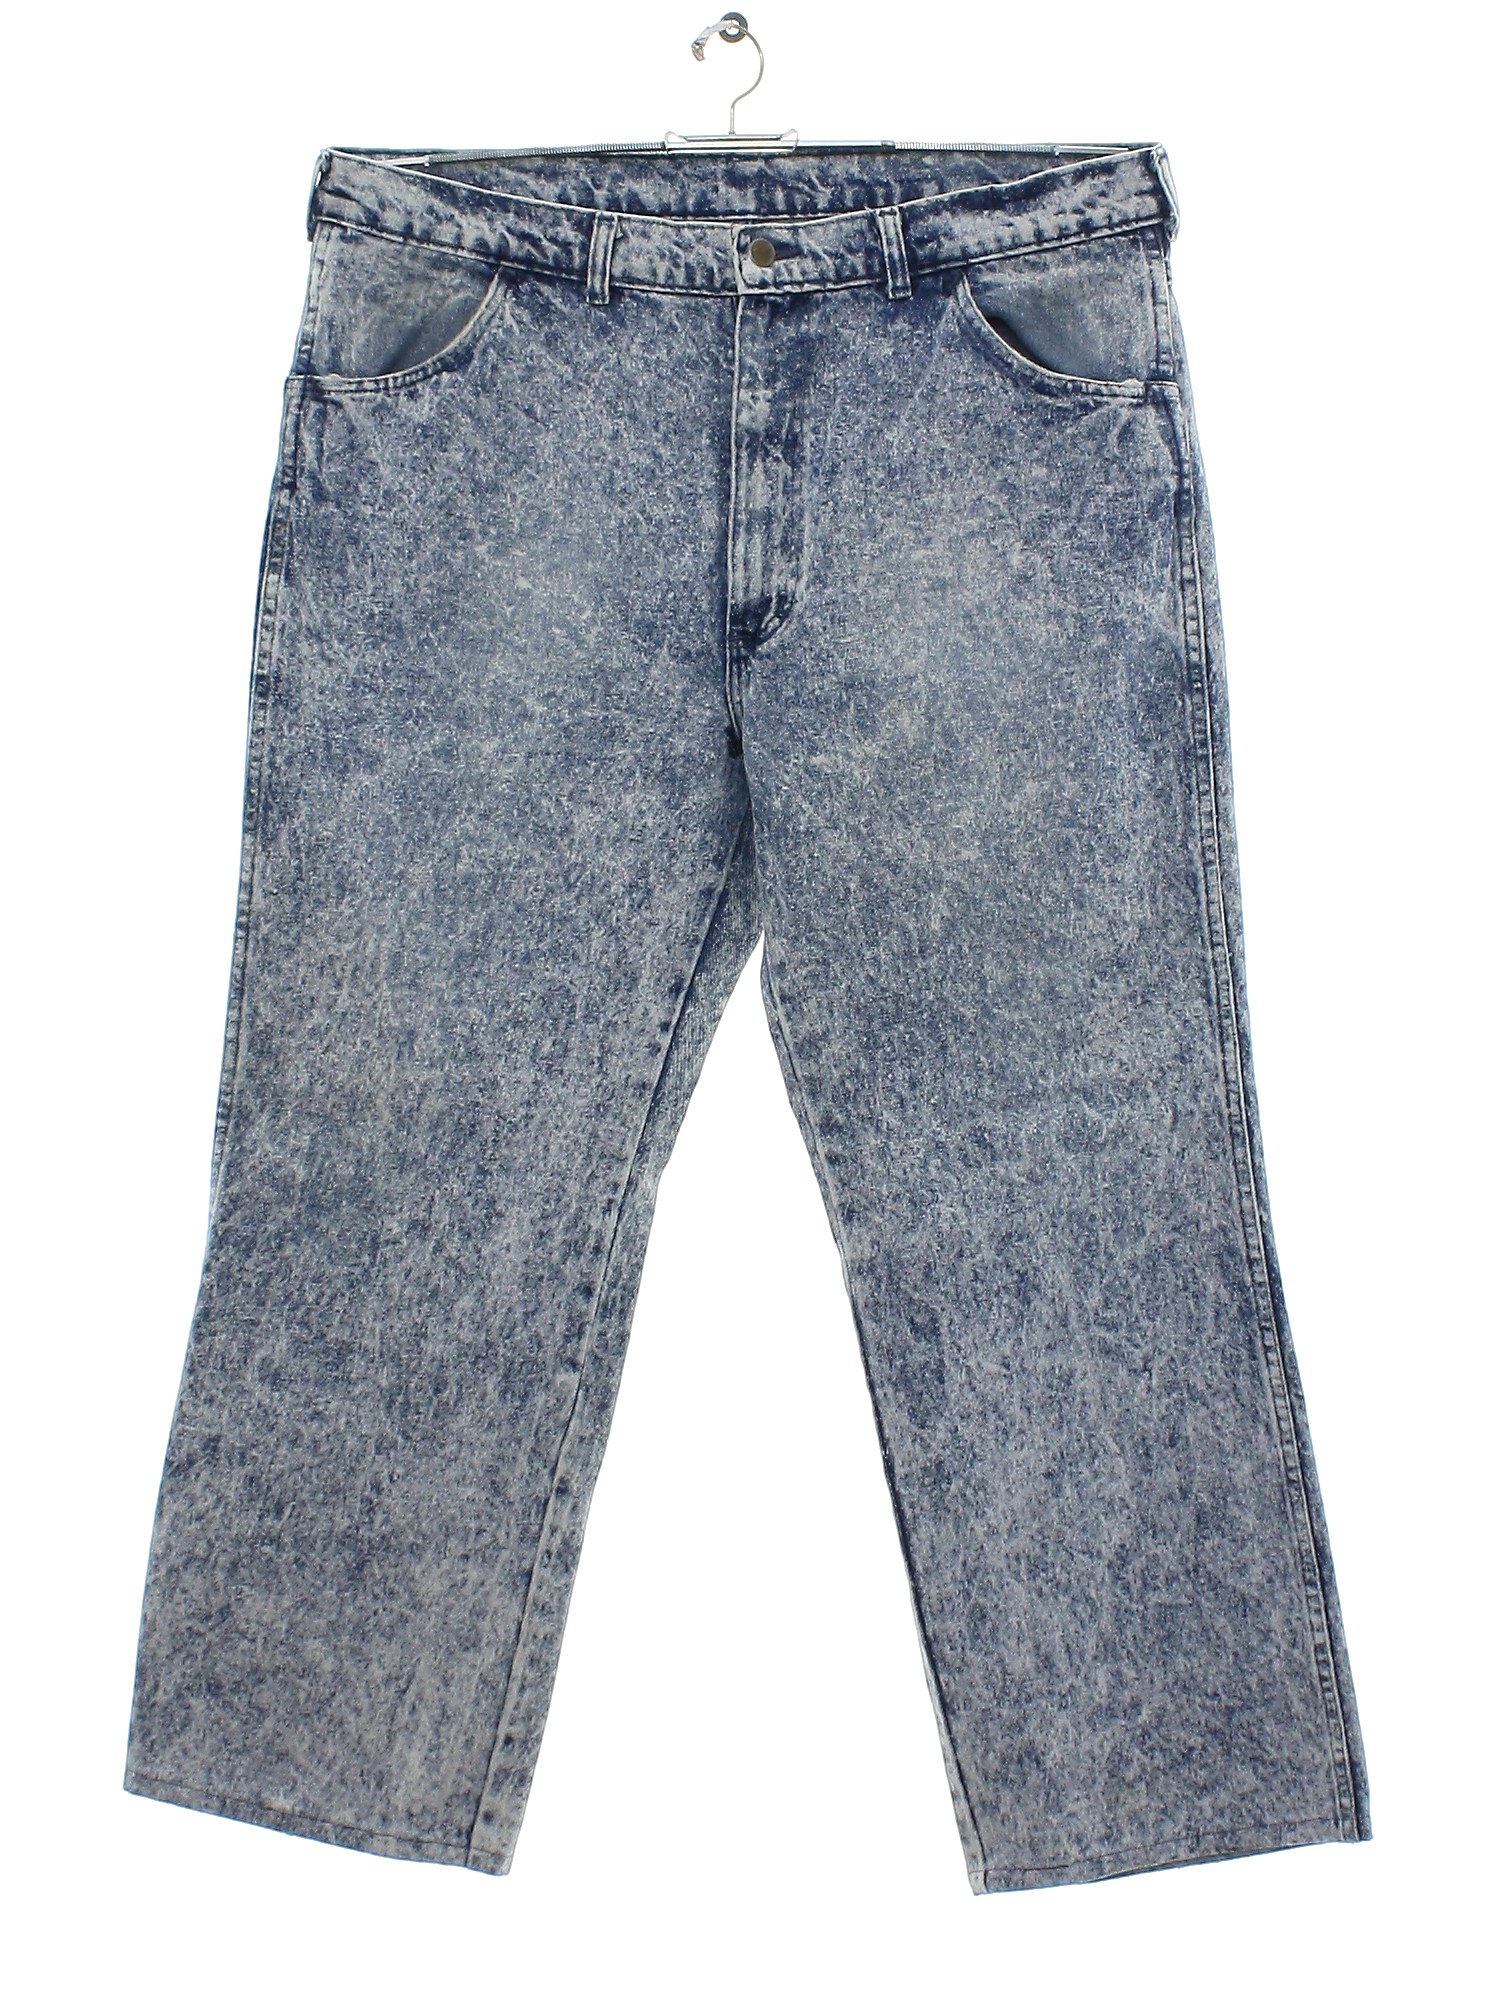 80s Retro Pants: 80s -No Label- Mens acid washed slightly faded and ...